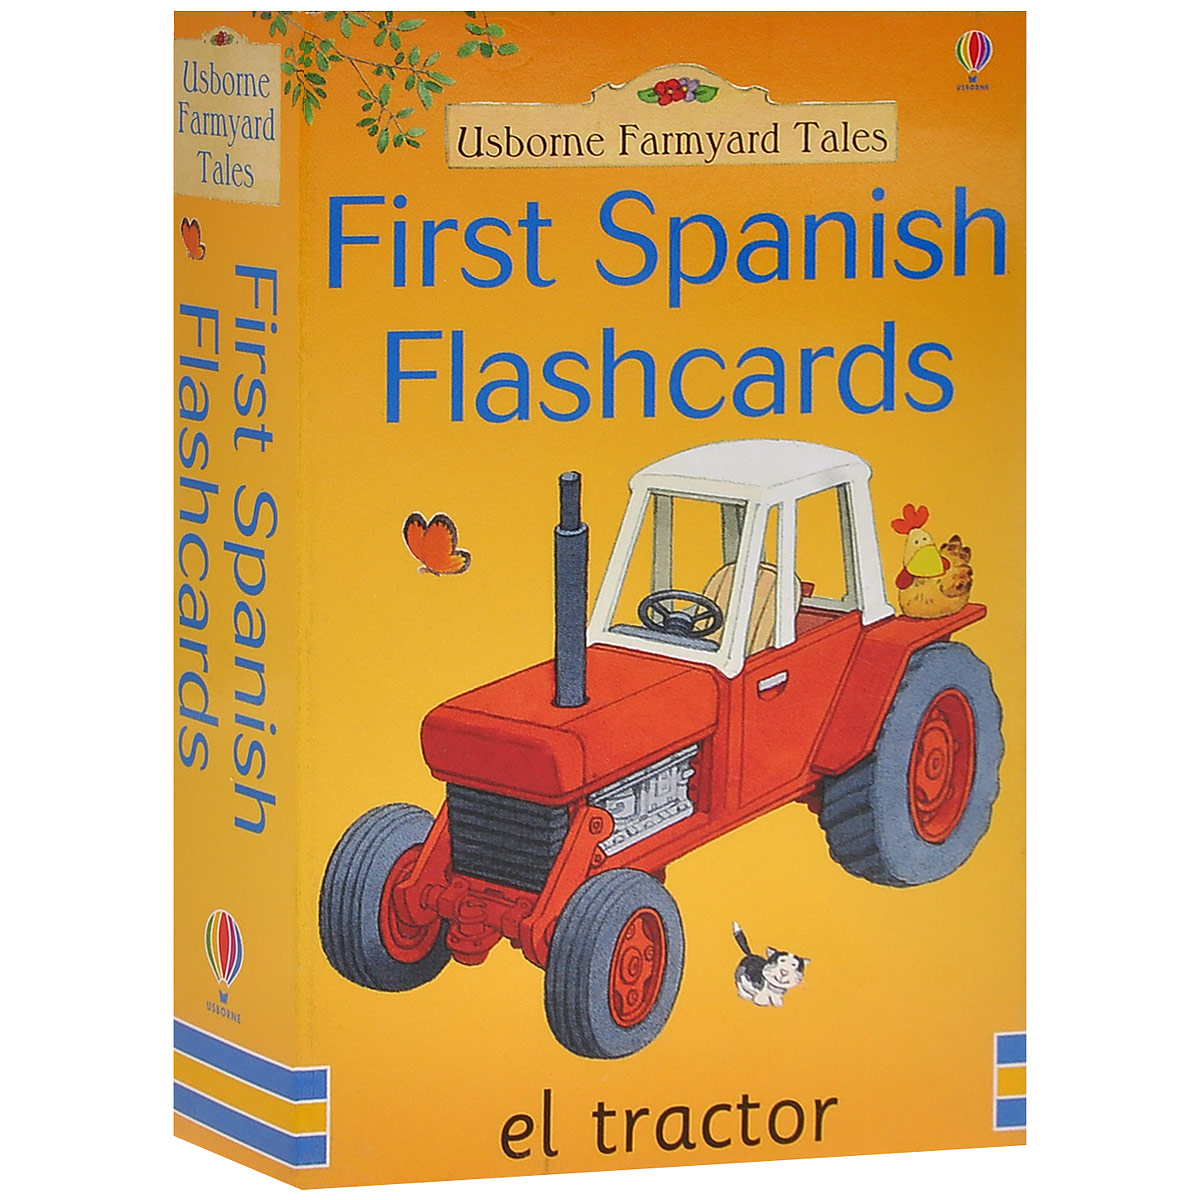 First Spanish Flashcards (  50 )12296407These Spanish Flashcards are a great way to help children learn their jflrst Spanish words. There are 50 cards, each with a word and picture on one side, and the same word, alone, on the other. You can use the cards to play games, or just prop them up around the house or classroom as a reminder.